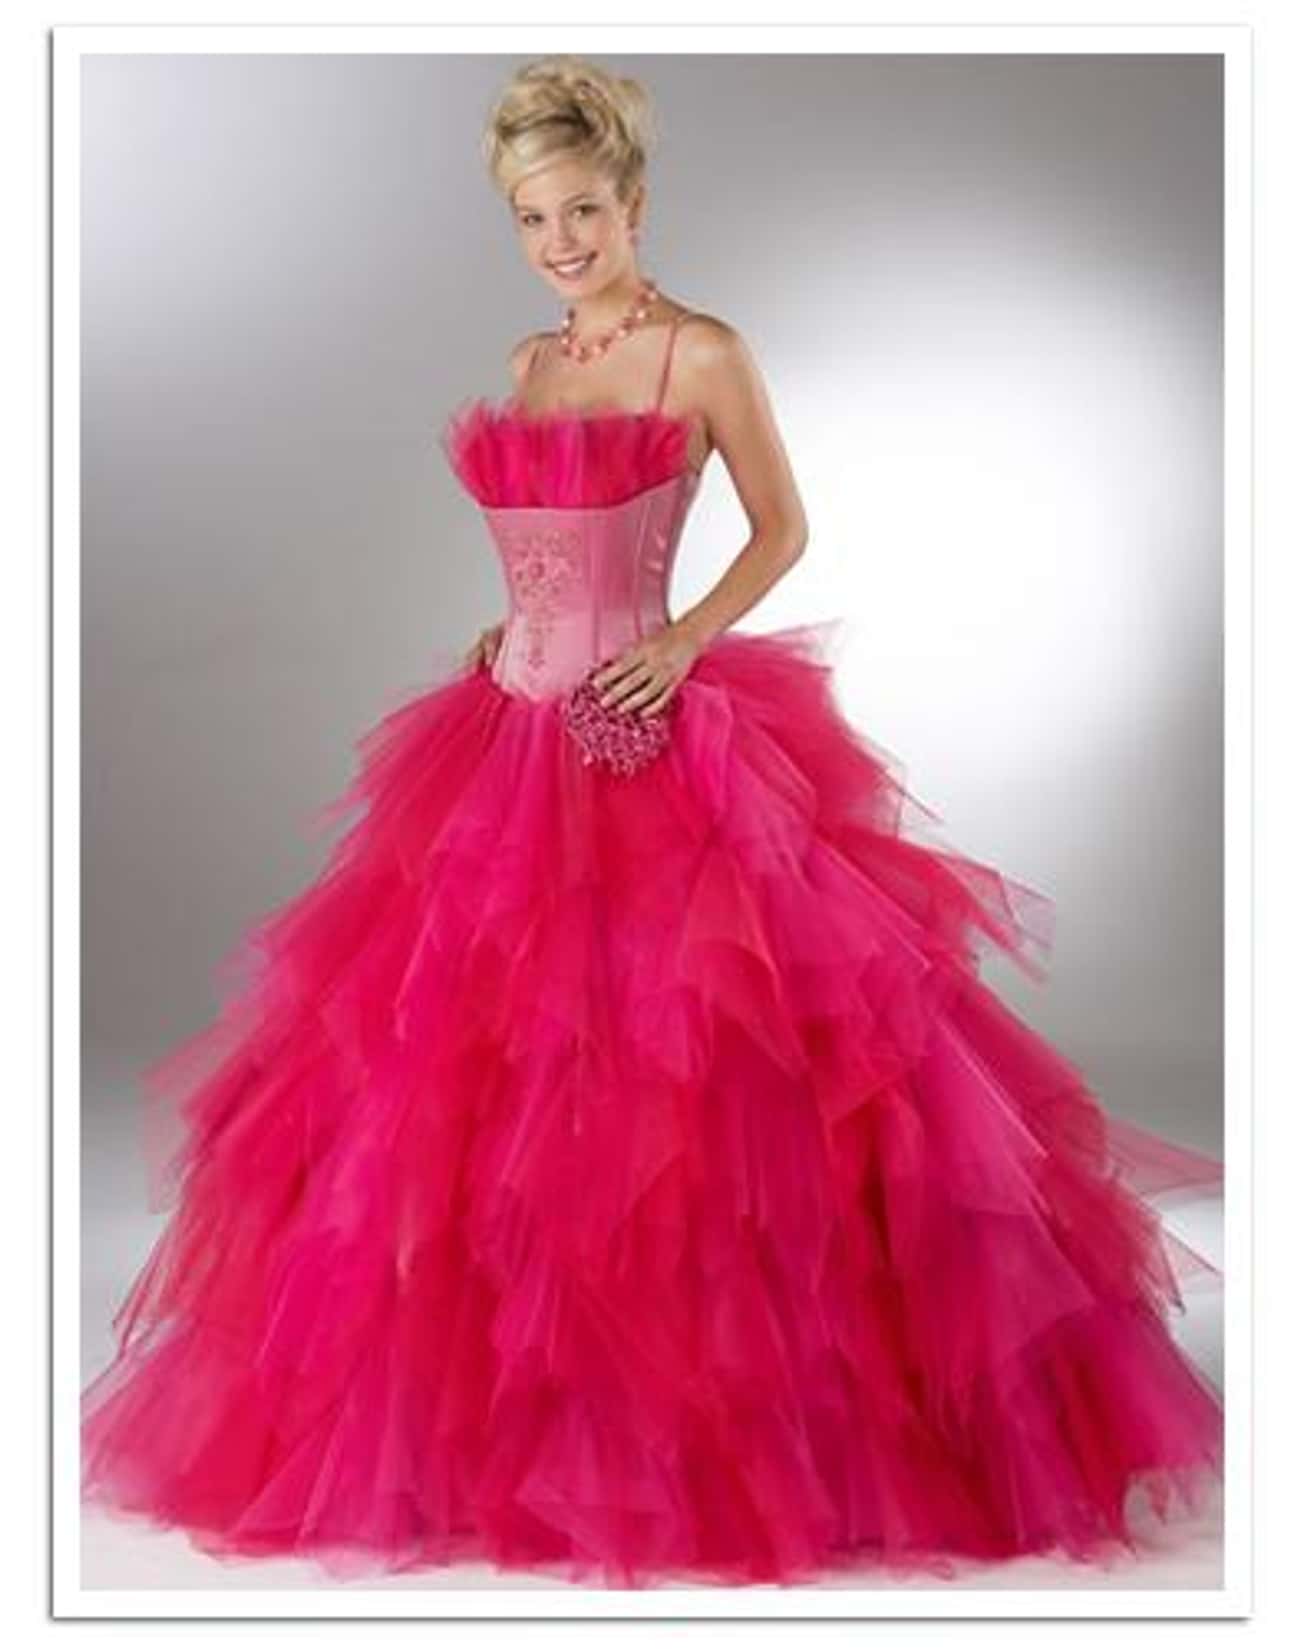 Pink Poofy Nightmare Prom Dress